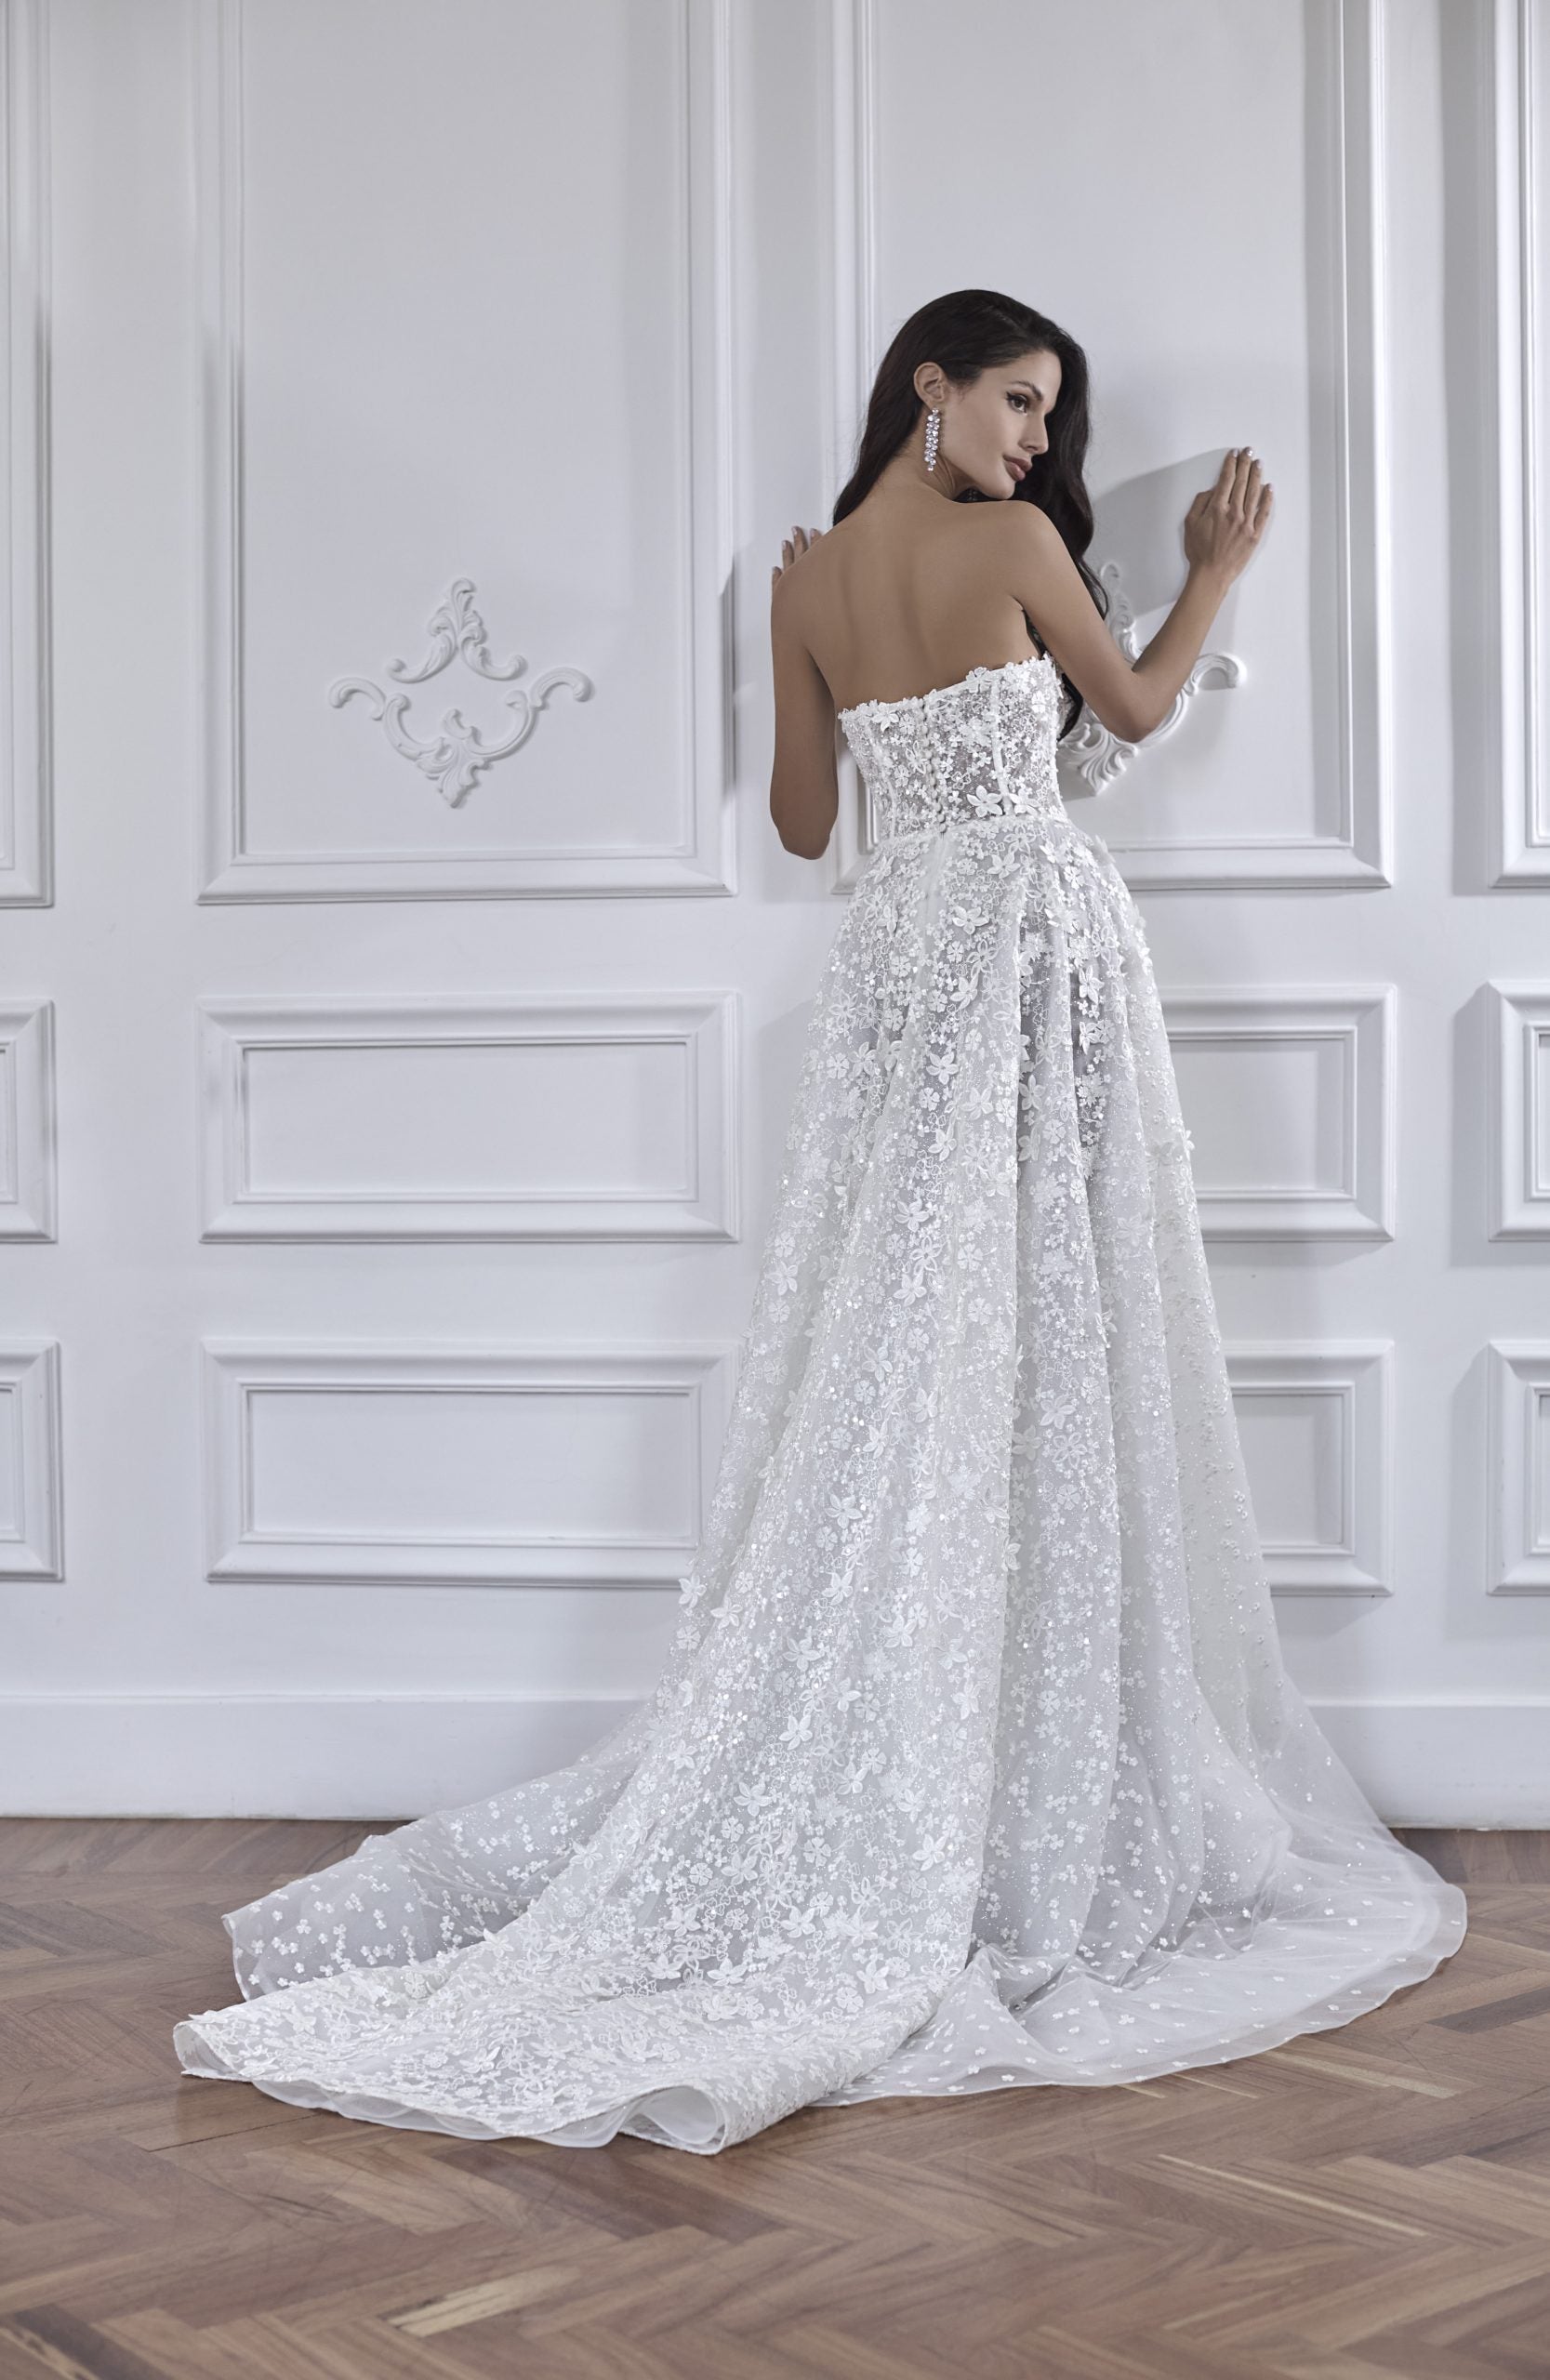 Strapless A-line Wedding Dress With 3D Floral Embroidery by Maison Signore - Image 2